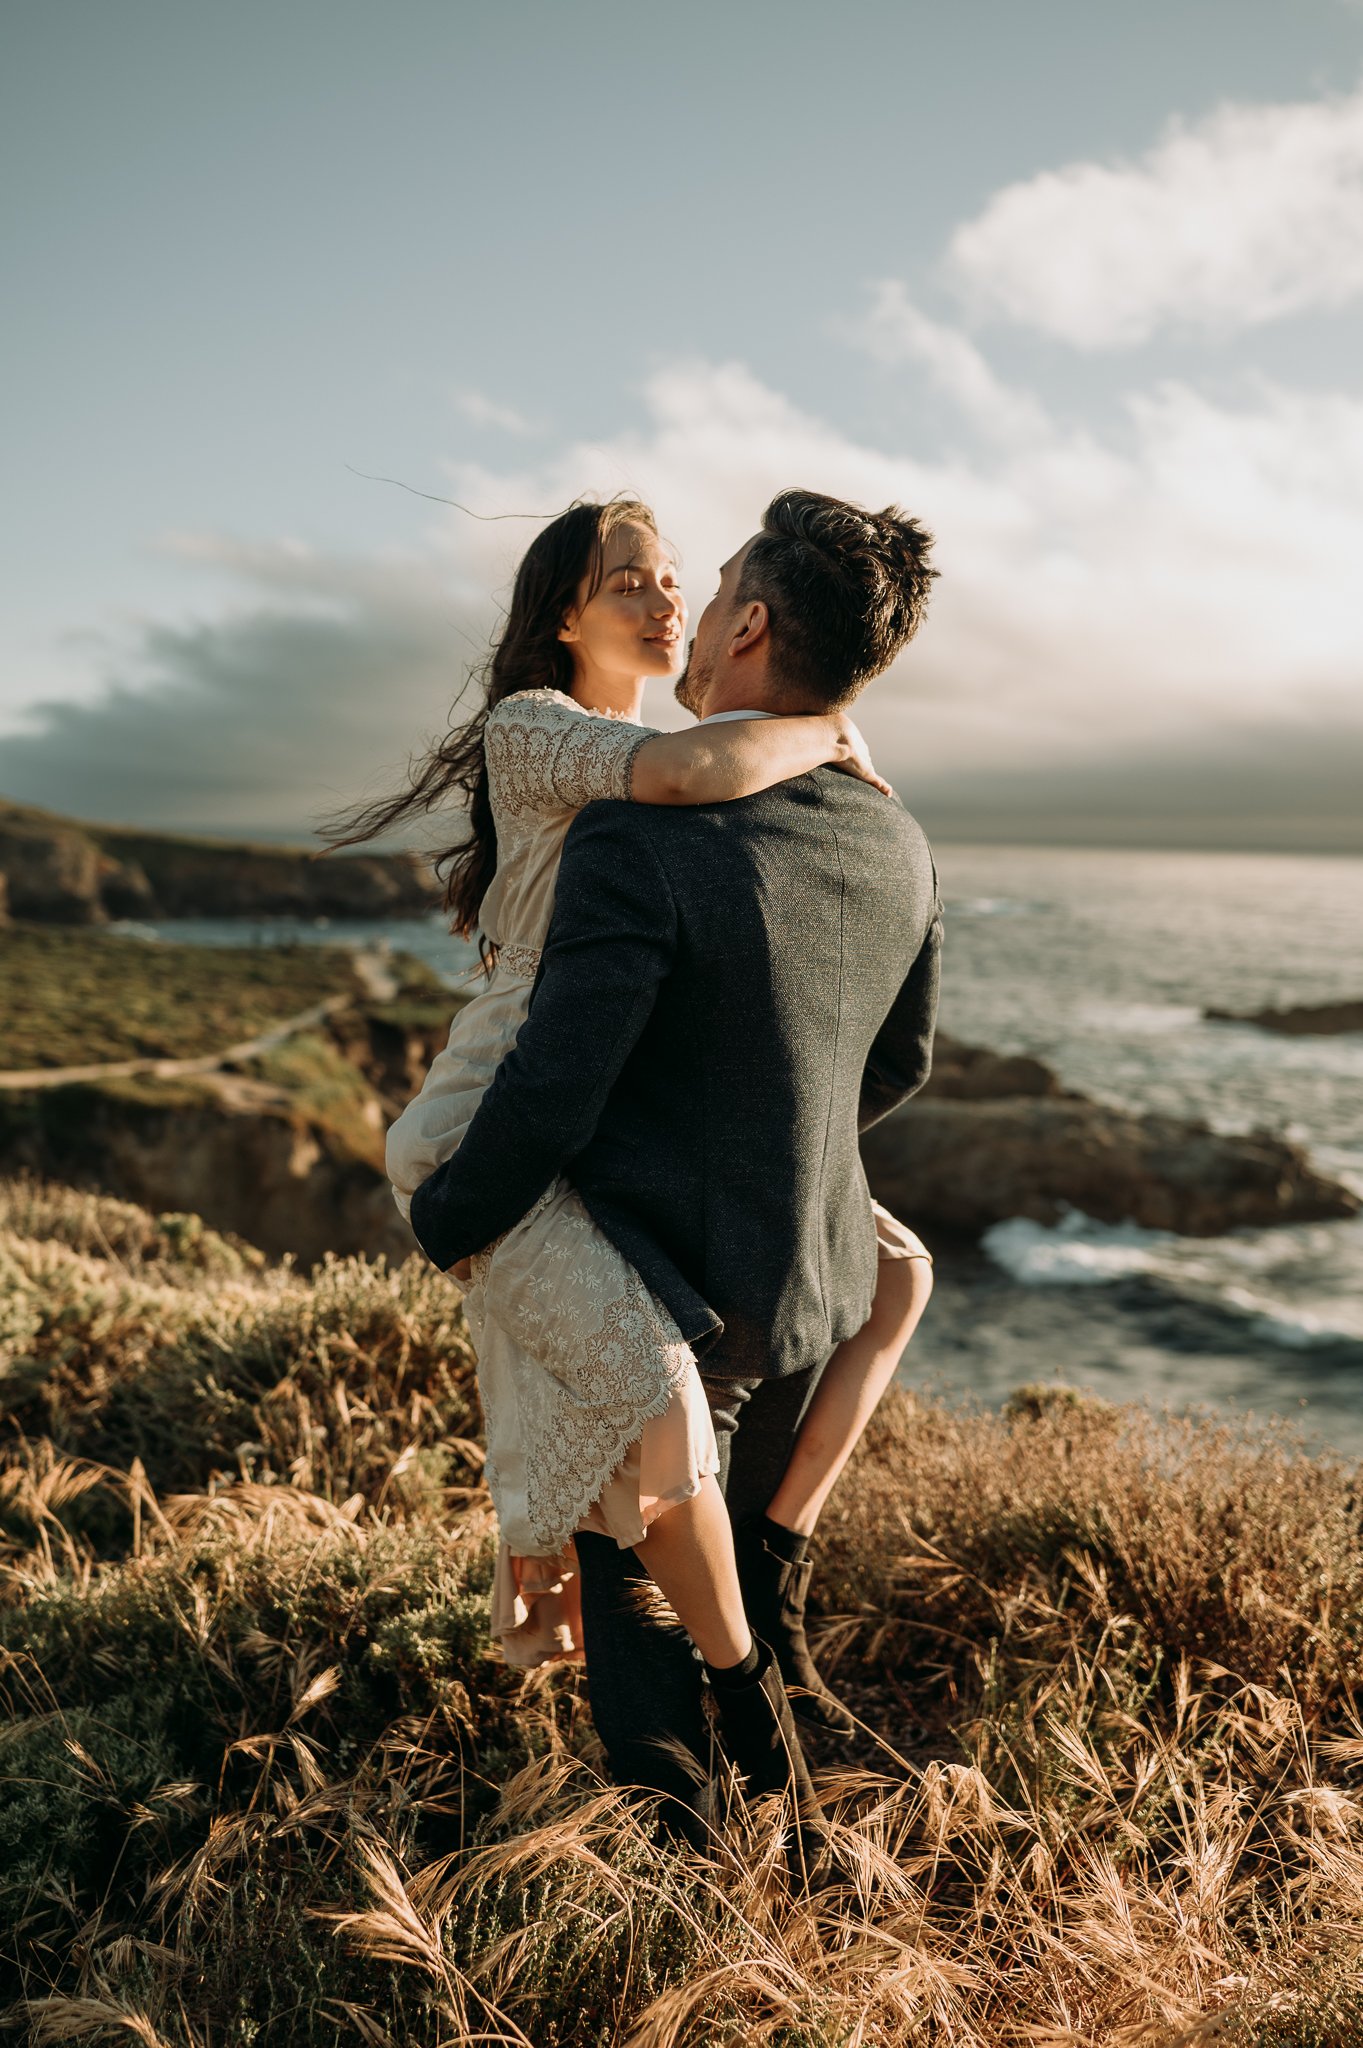  couple kissing with woman's legs around man's waist with Pacific Ocean in background